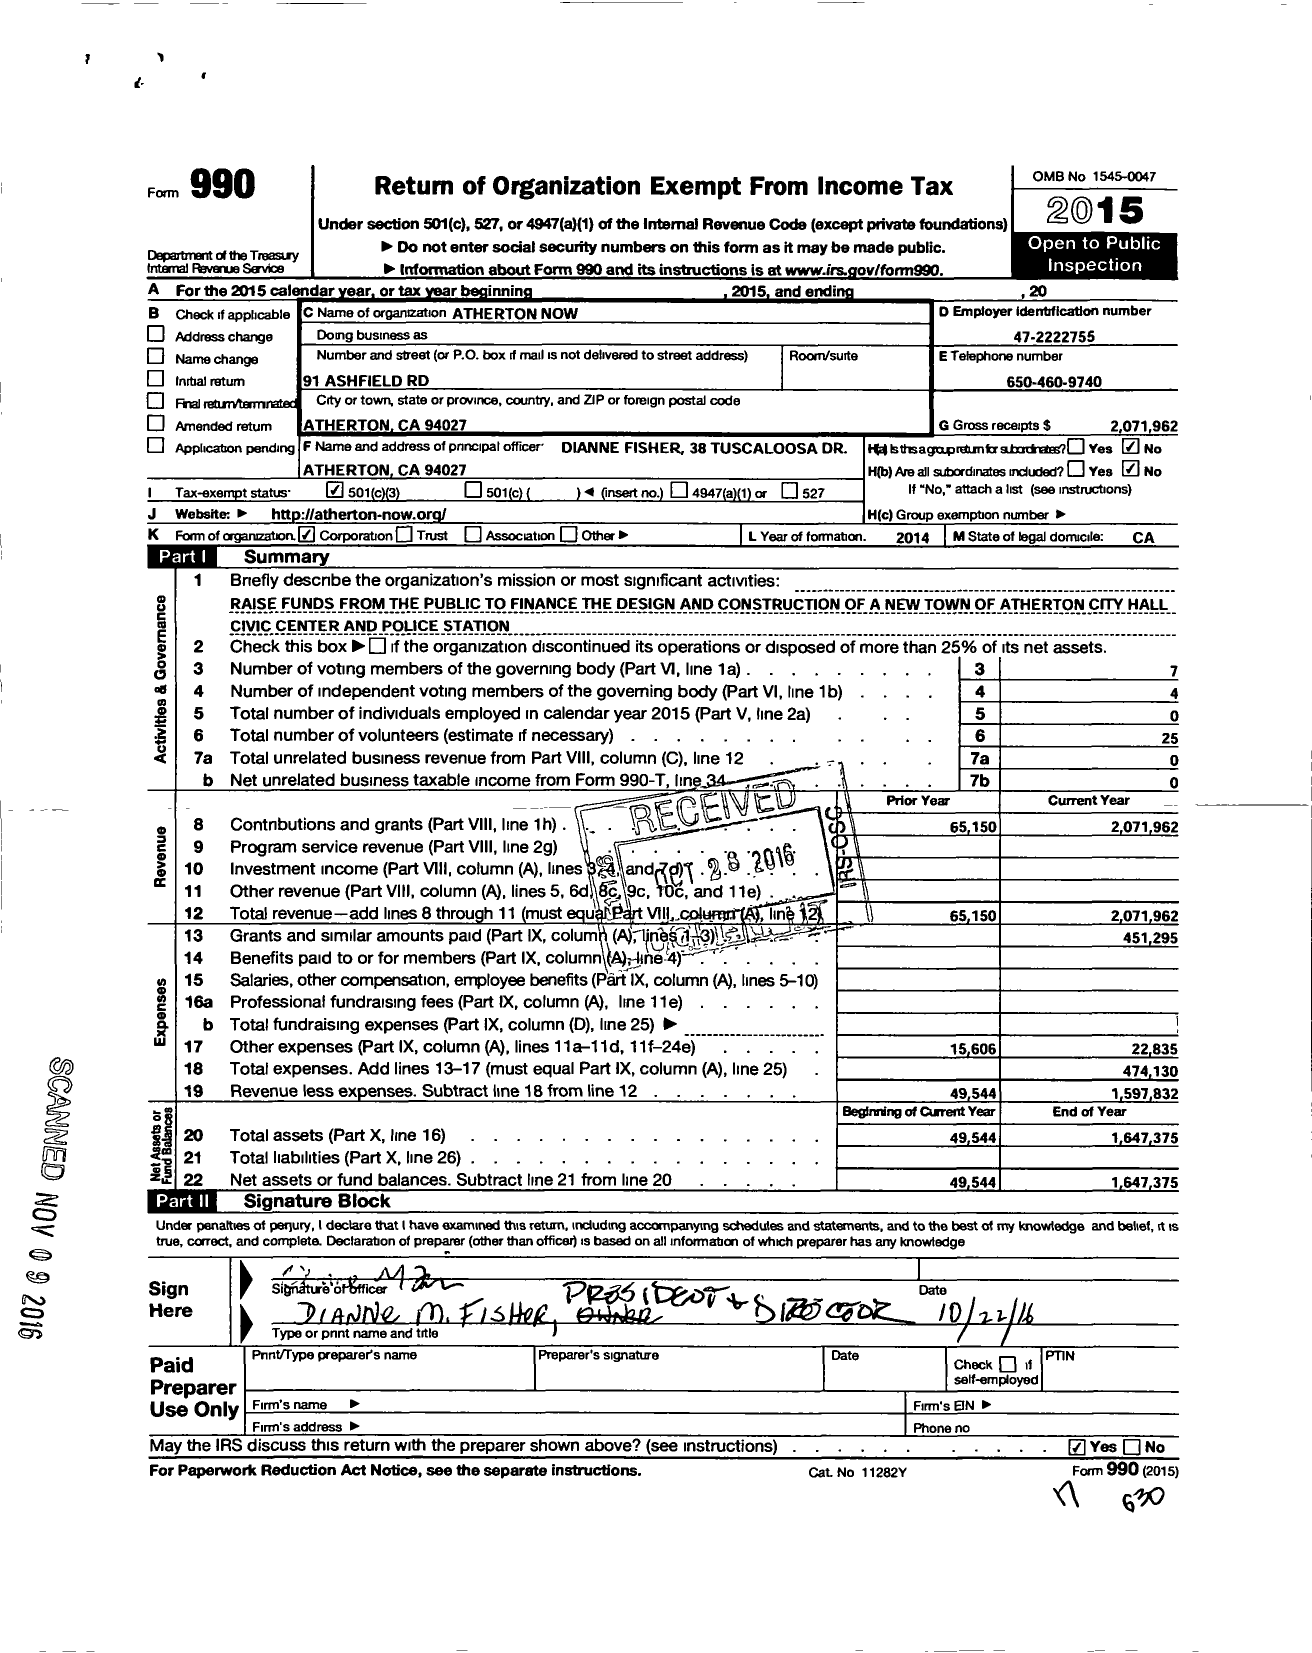 Image of first page of 2015 Form 990 for Atherton Now